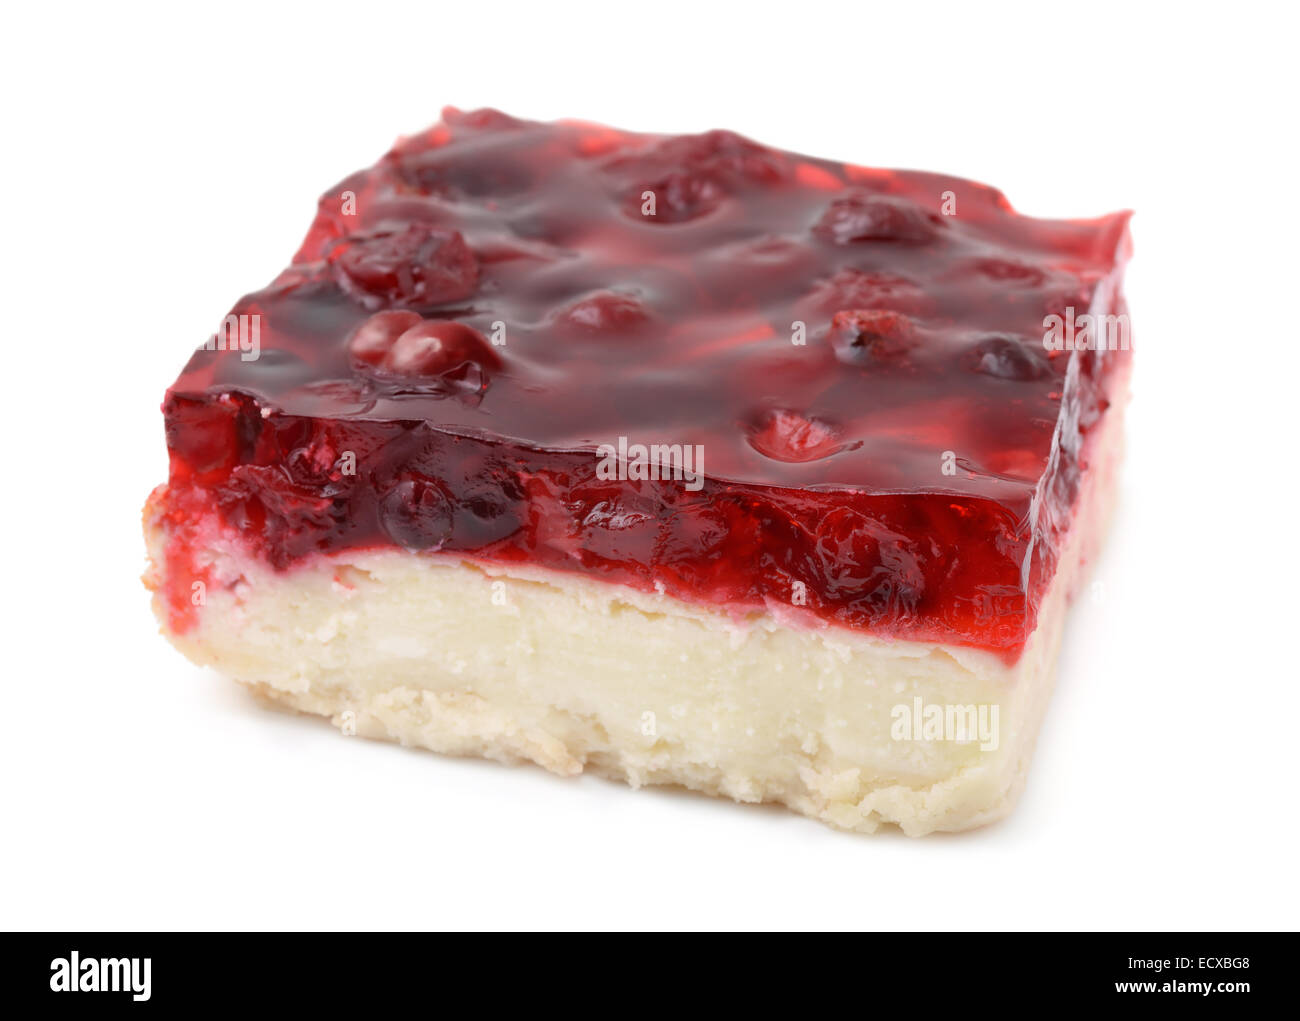 Piece of cherry cheesecake isolated on white Stock Photo